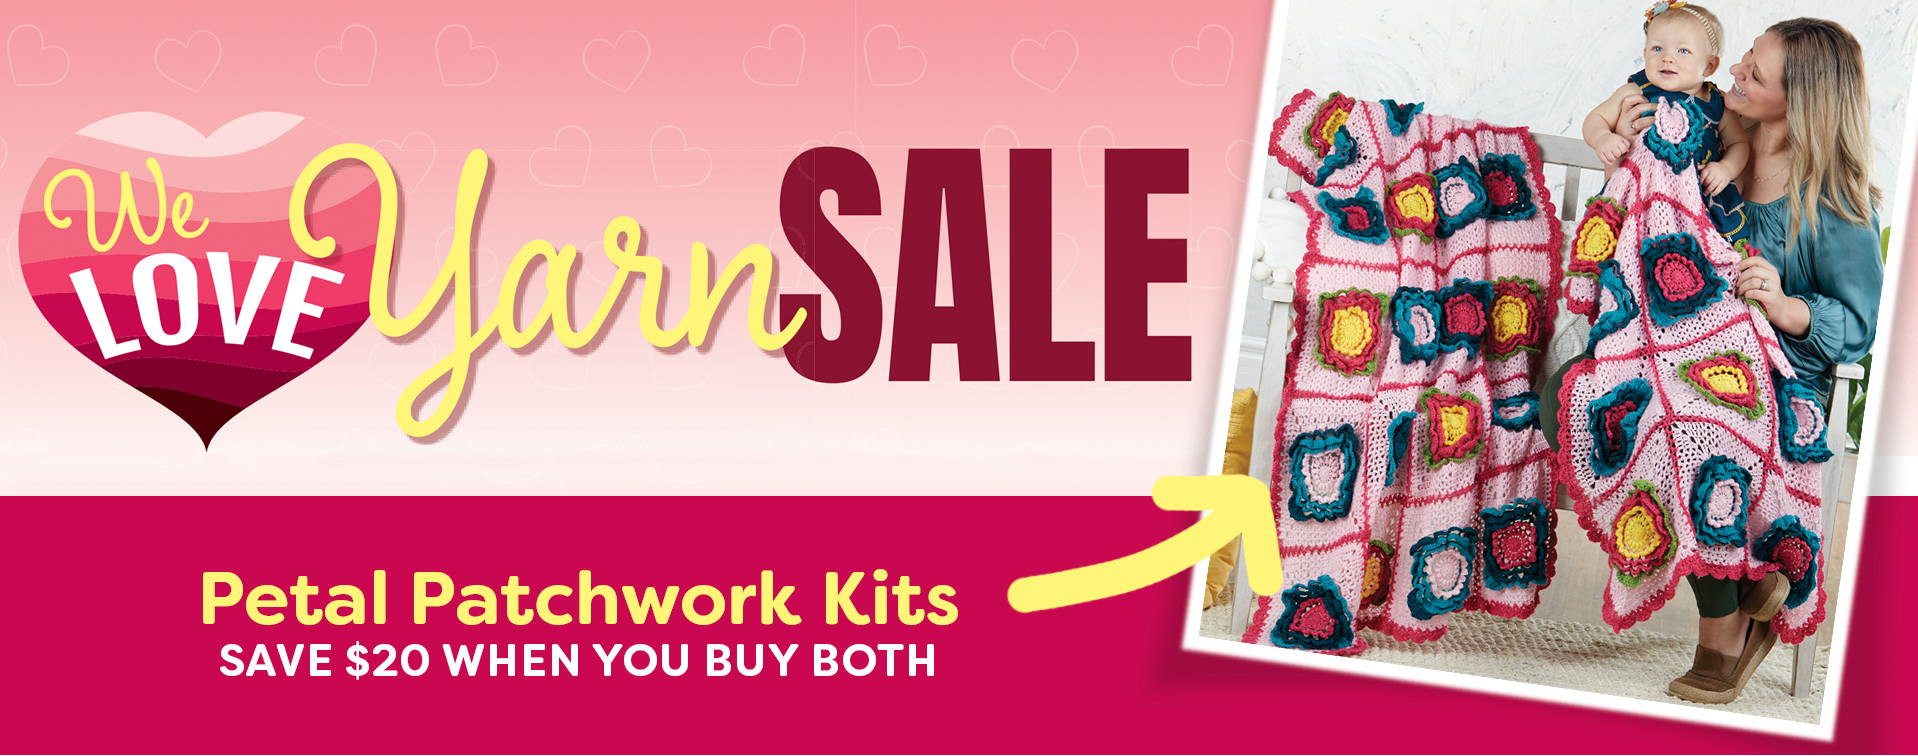 We Love Yarn Sale: Save $20 when you buy both Petal Patchwork Kits